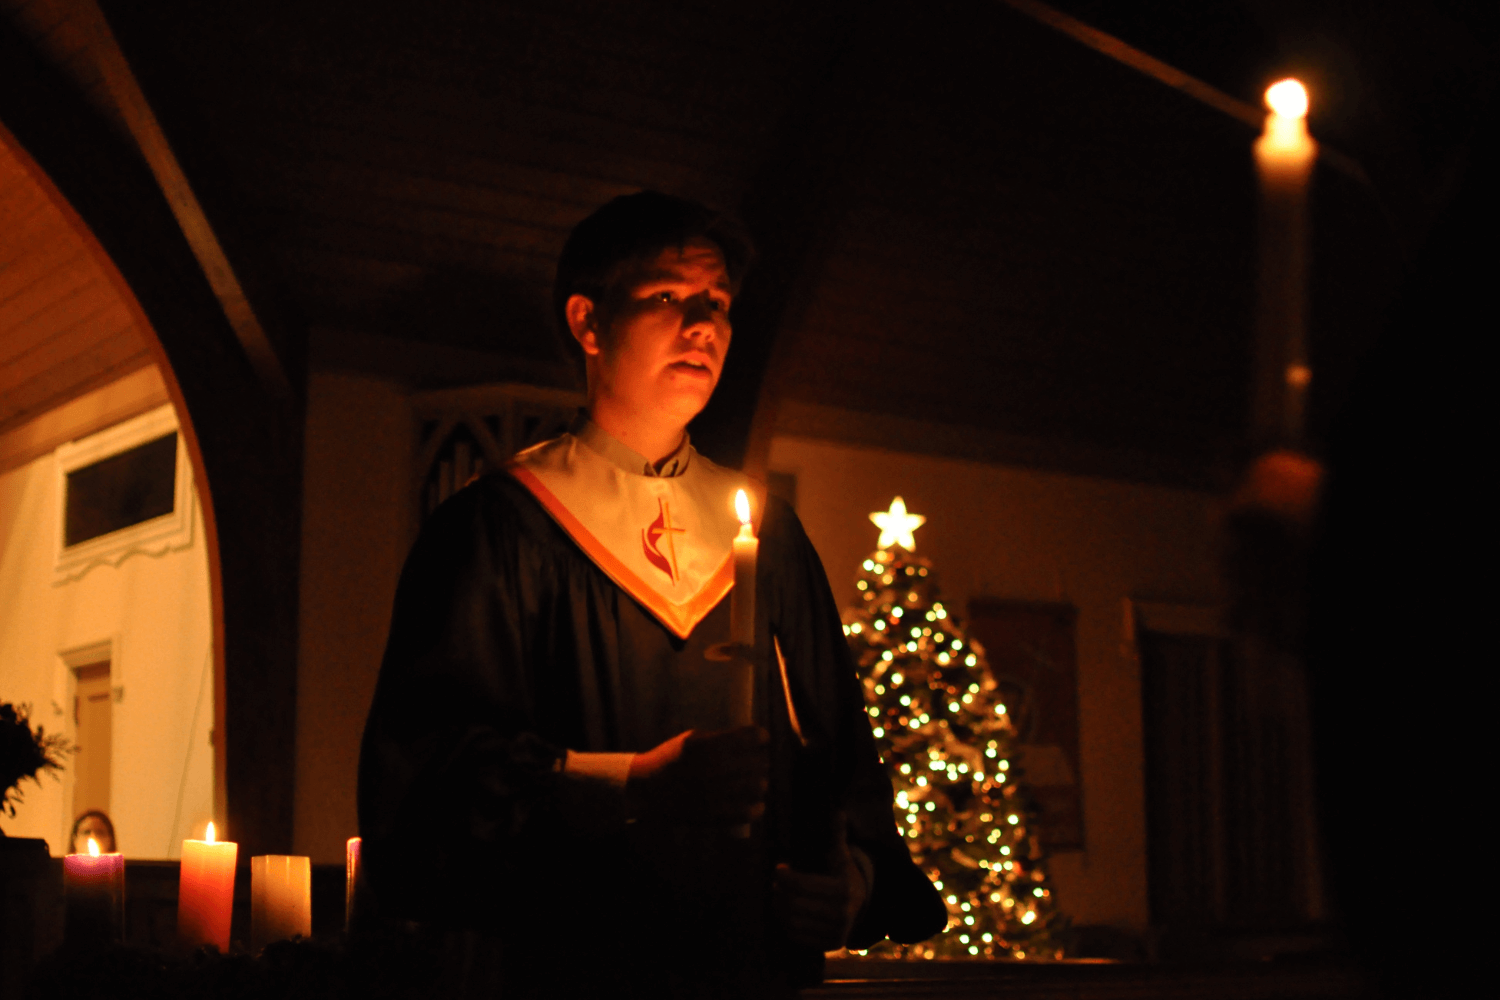 United Methodists gather for a Candlelight Service on Christmas Eve at St. Matthew UMC in Fort Worth, Texas. Photo by Angelia Sims of Angelia's Photography.